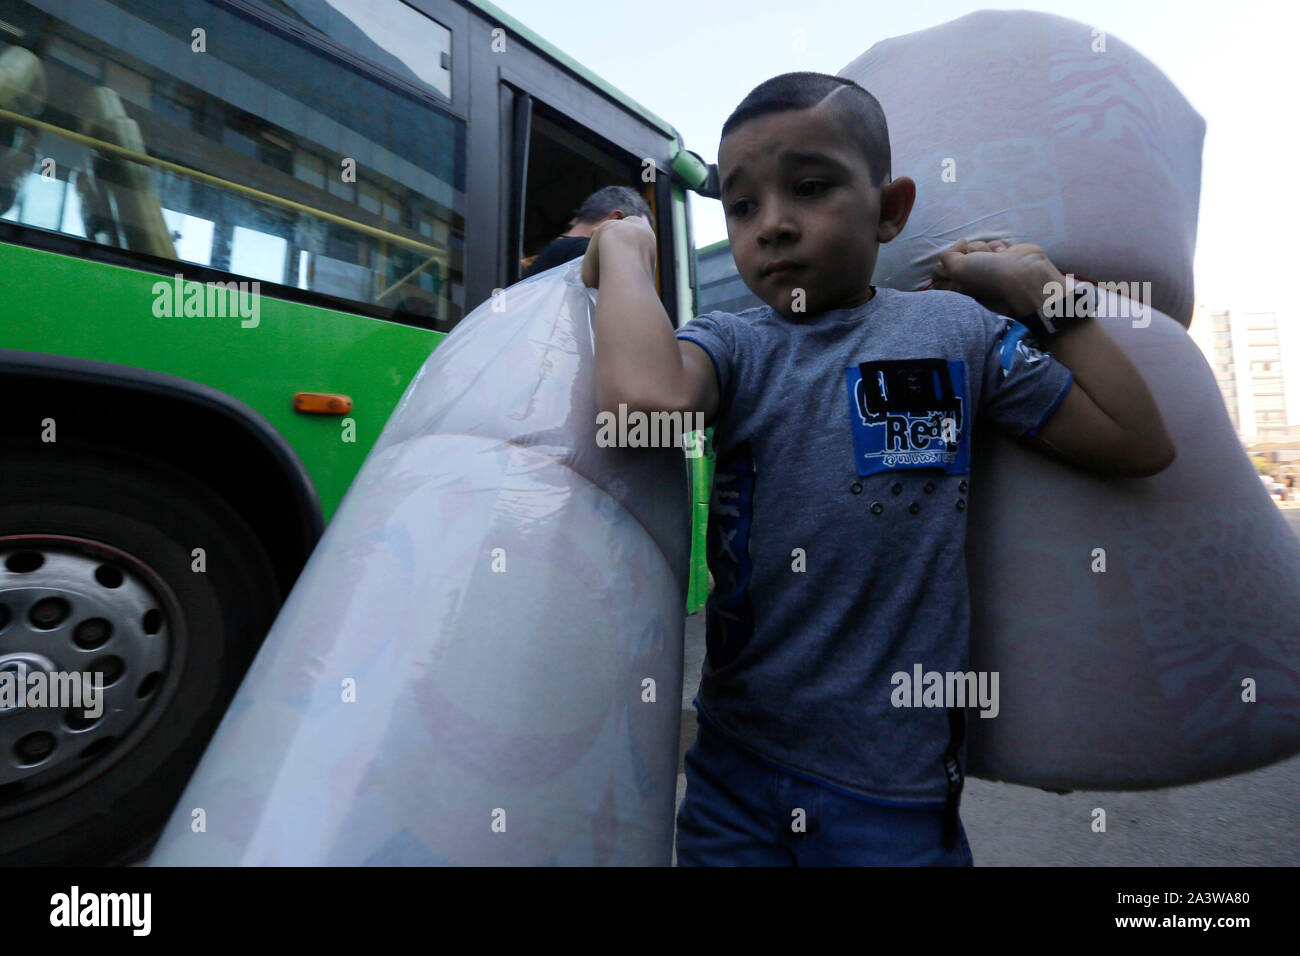 Beirut. 10th Oct, 2019. A Syrian boy carries his belongings as he goes on a homebound trip by bus from Beirut, Lebanon on Oct. 10, 2019. Around 1,000 Syrian refugees returned home from Lebanon on Thursday, the National News Agency reported. Syrians from different cities in Lebanon, including the capital Beirut, Zahle, Sidon and Tripoli, returned to their homeland by bus with the help of Lebanese General Security. Credit: Bilal Jawich/Xinhua/Alamy Live News Stock Photo